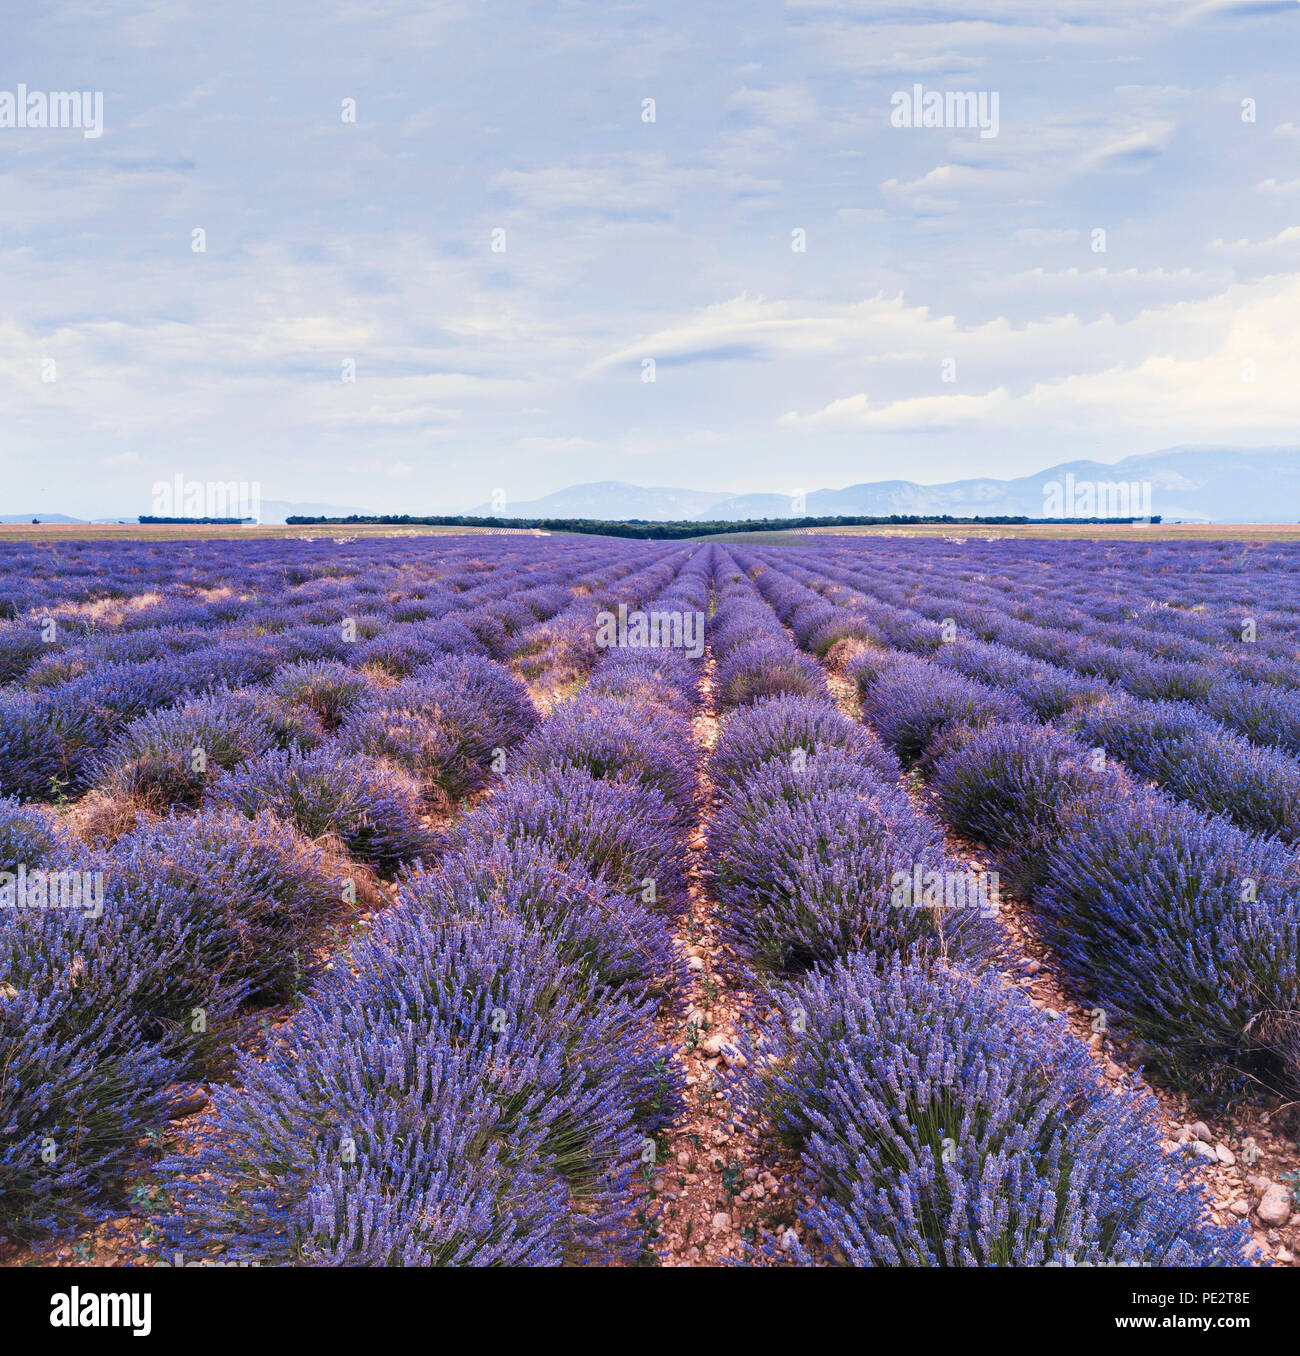 beautiful nature landscape, lavender field in bloom in Provence, France Stock Photo